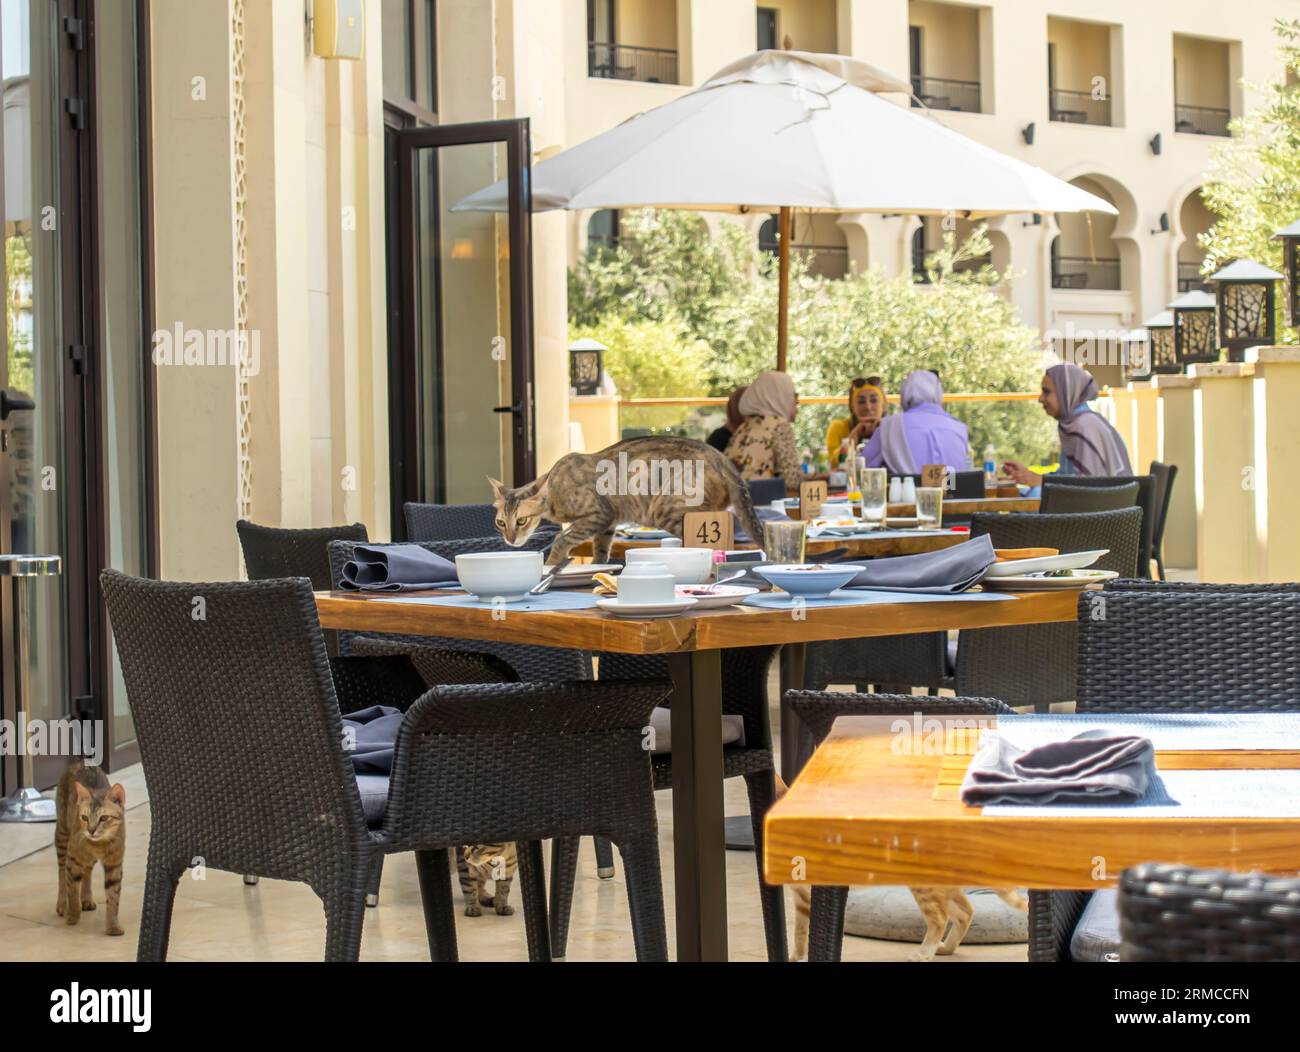 Cats eating from leftover plates in the breakfast area in the luxurious hotel Al Manara Aqaba Jordan Stock Photo